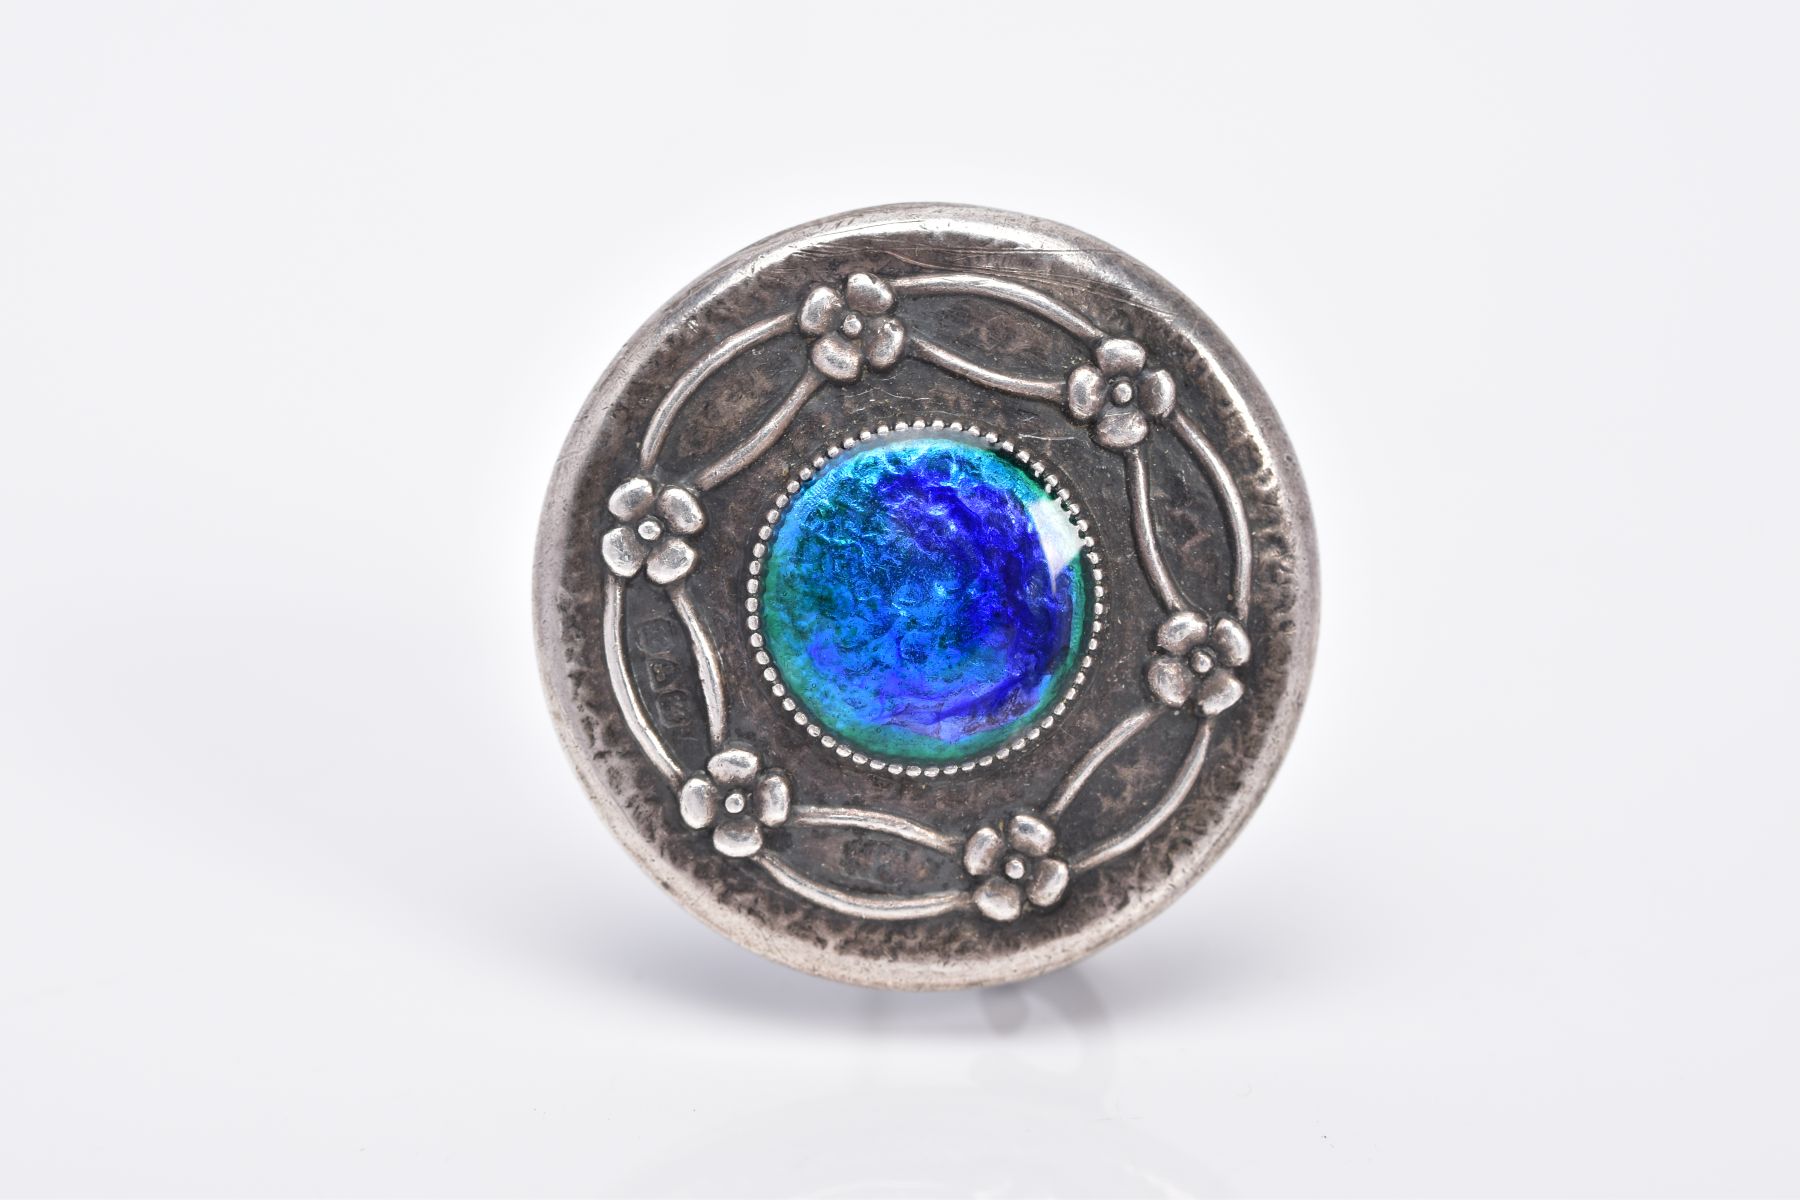 AN EARLY 20TH CENTURY CHARLES HORNER BROOCH, the guilloche enamel brooch, of circular form, set with